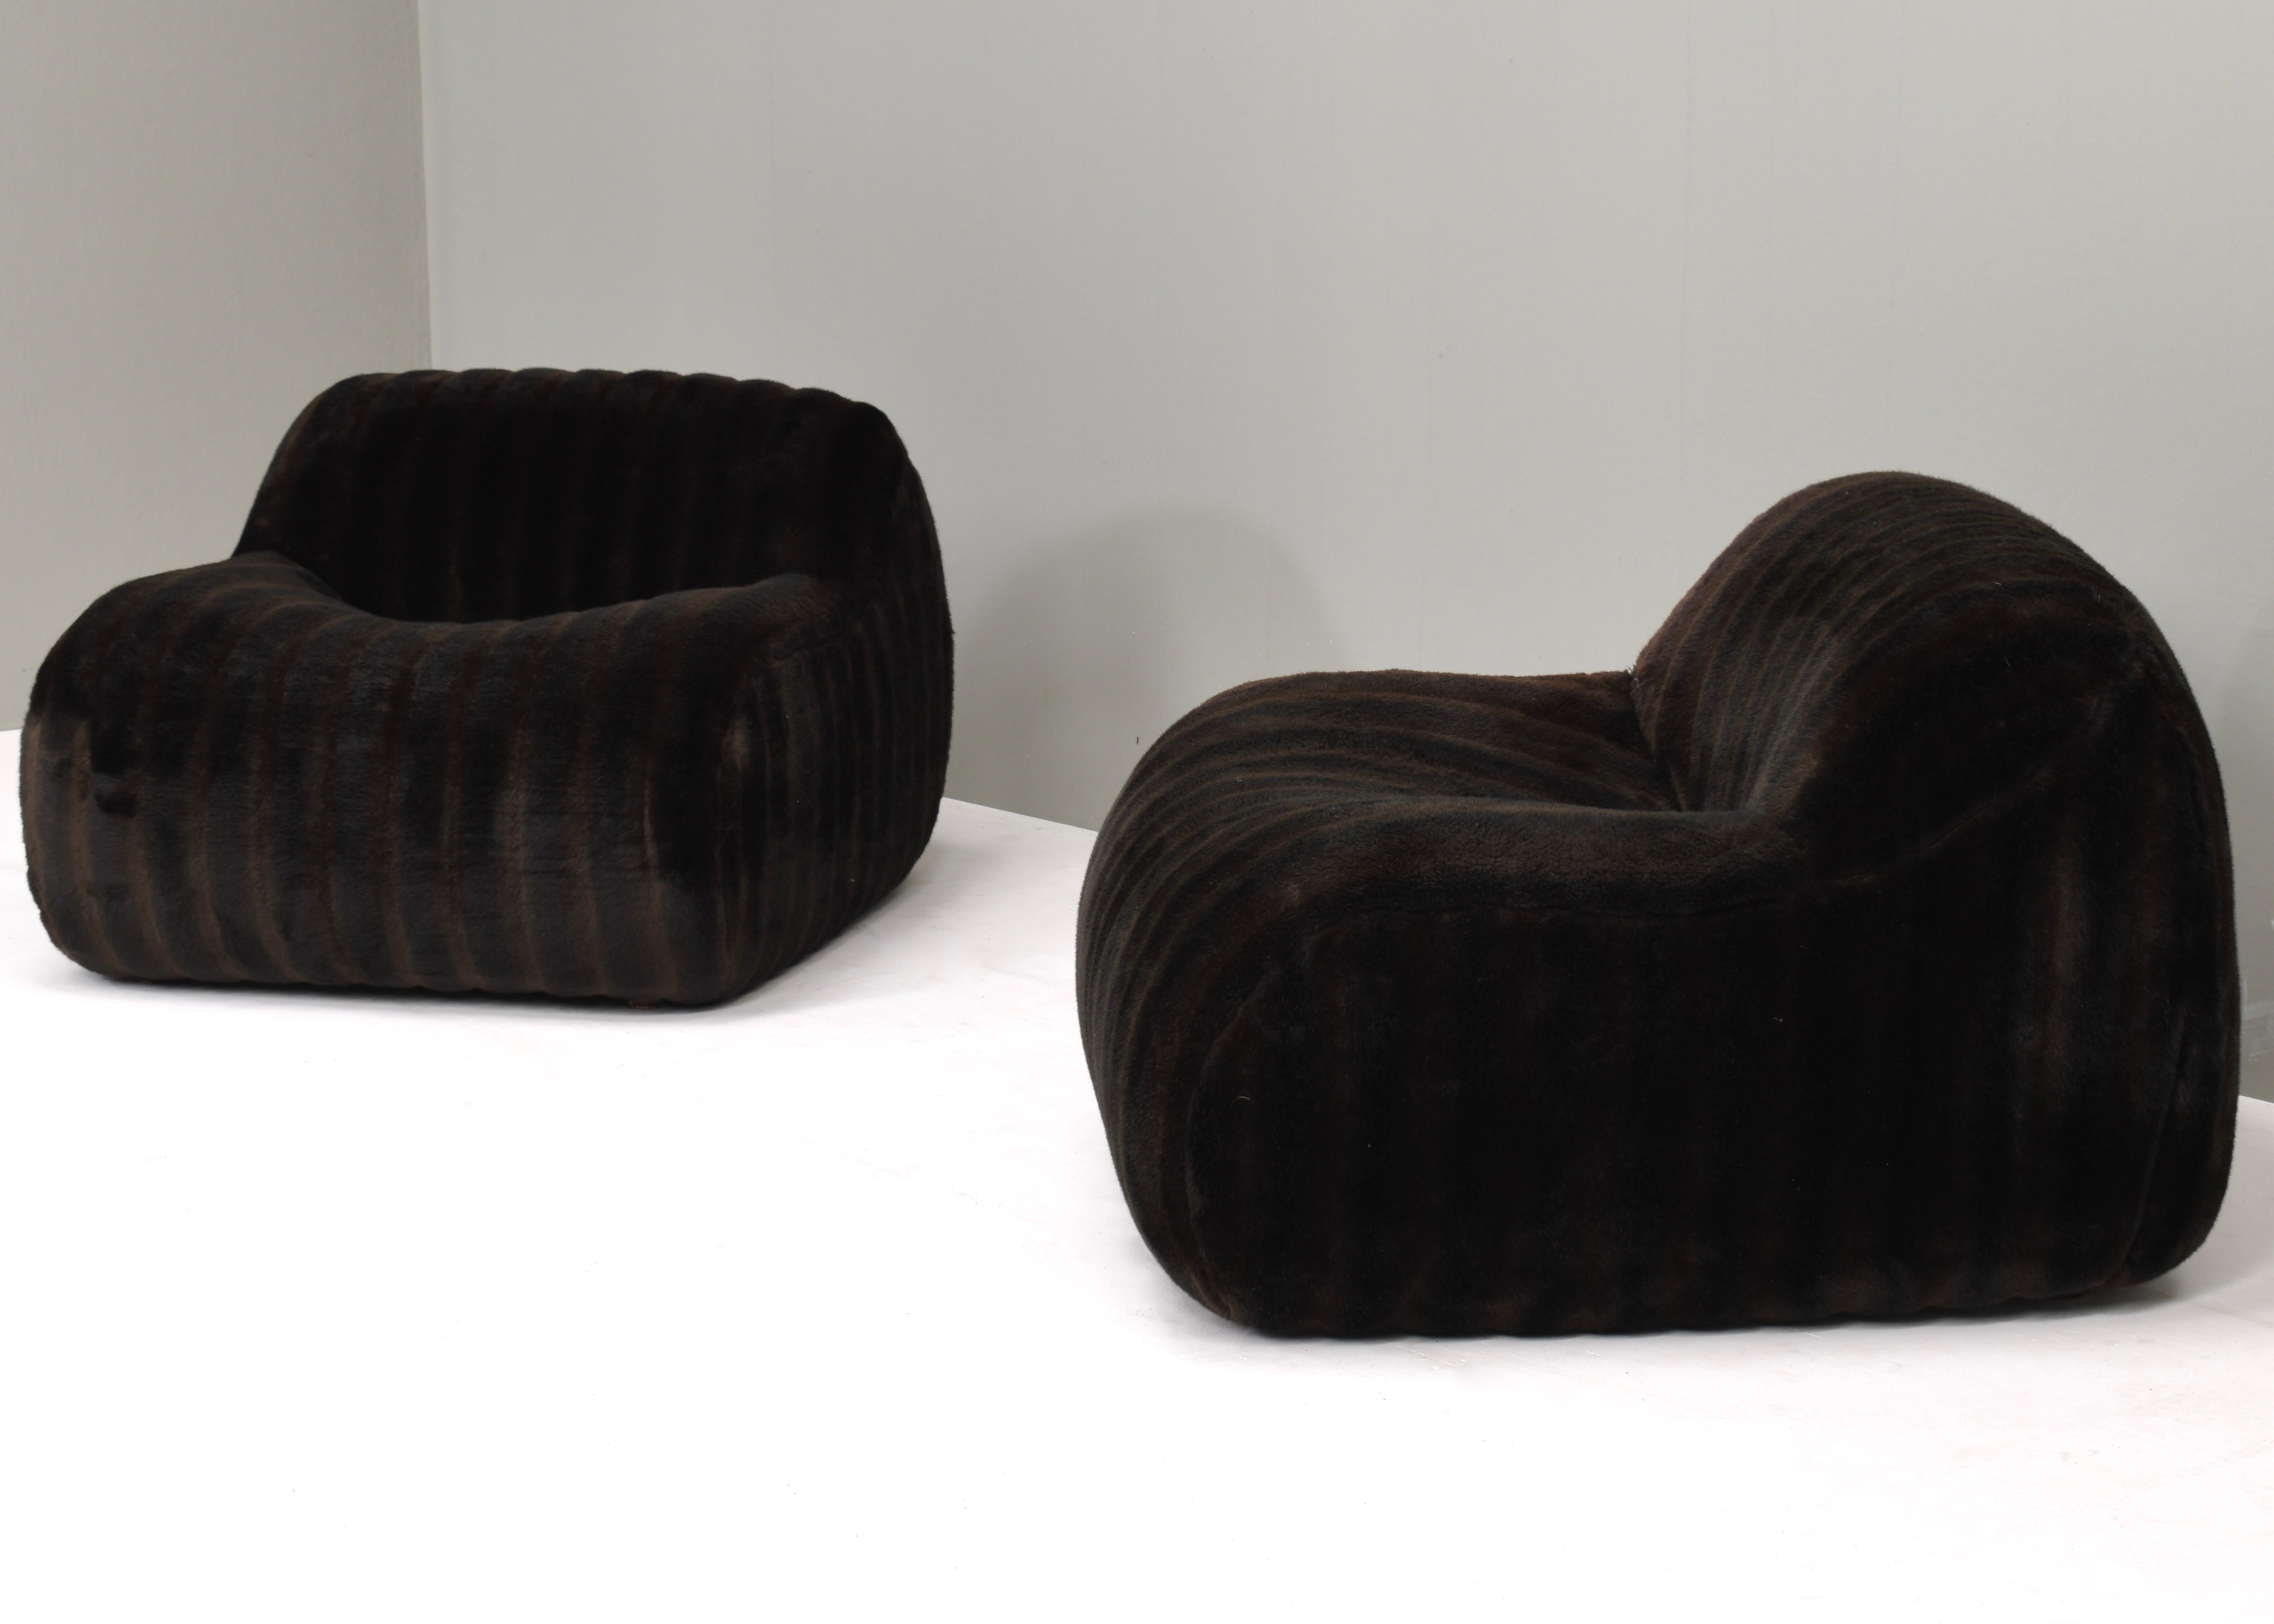 Amazing organic shaped pair of Italian lounge chairs in original vintage faux fur. They are extremely comfortable and give a cosy and warm feeling. These chairs are true original 1970's eyecatchers and will make great pieces in any modern interior.